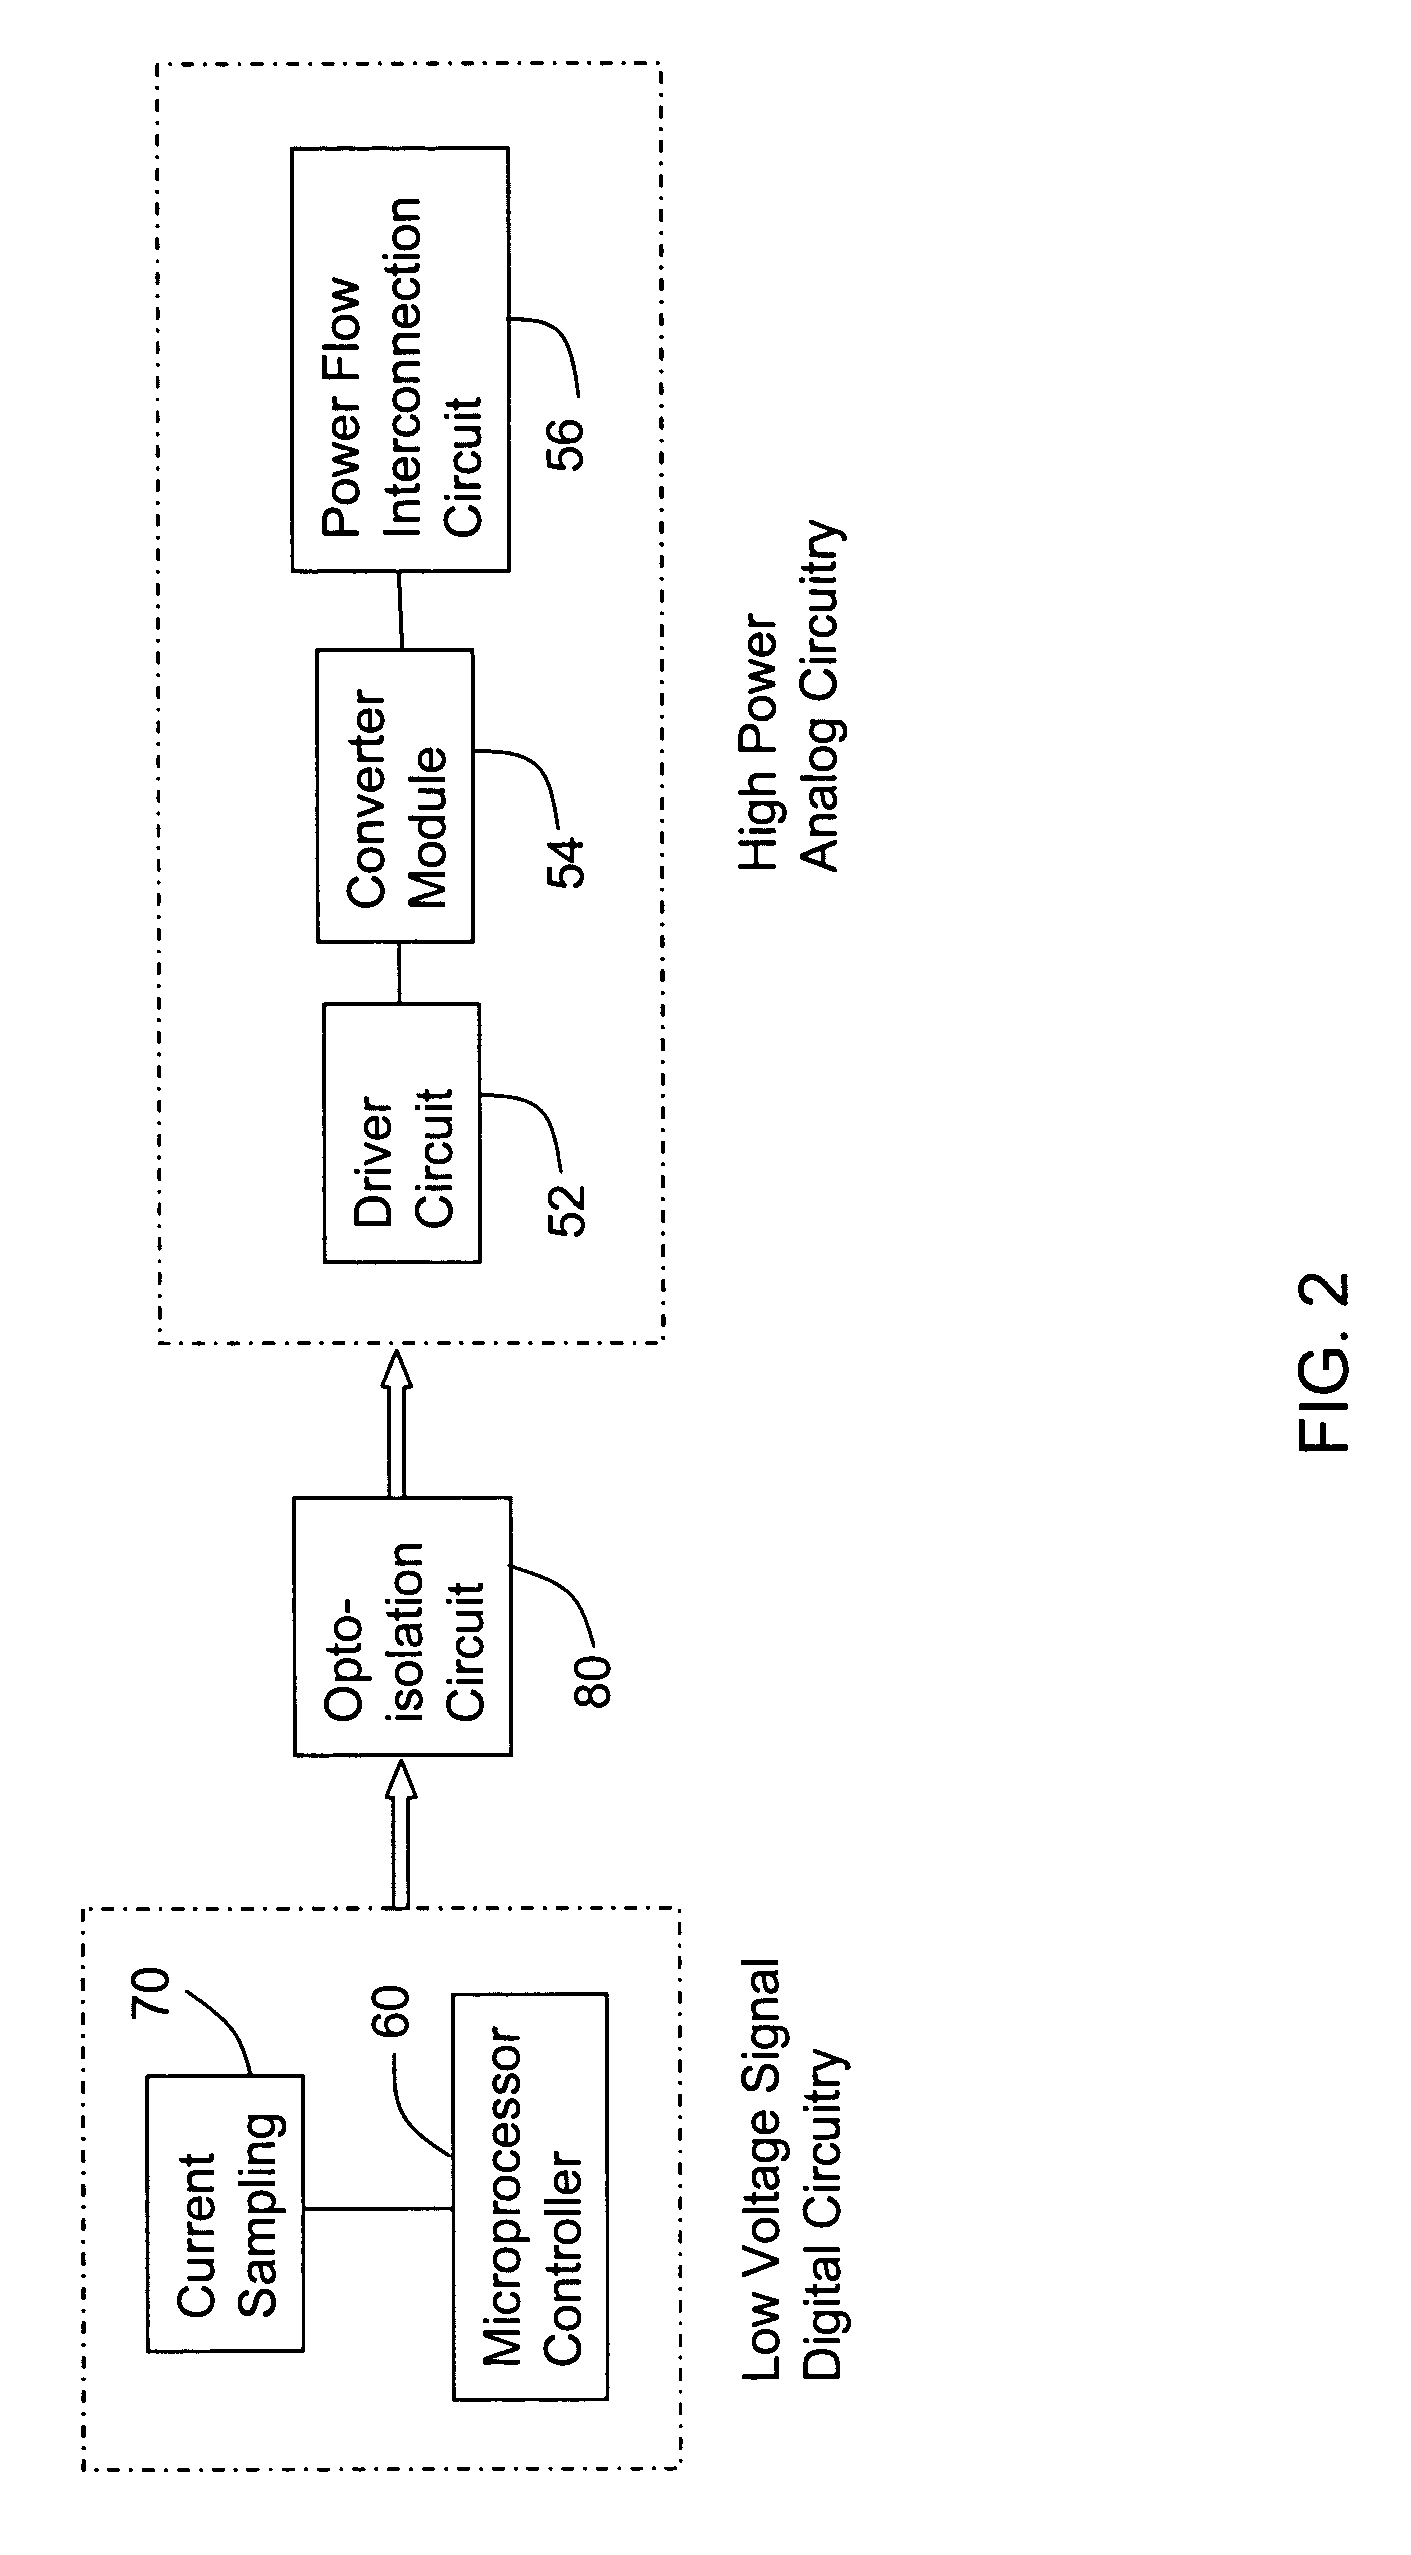 Enhanced distributed energy resource system